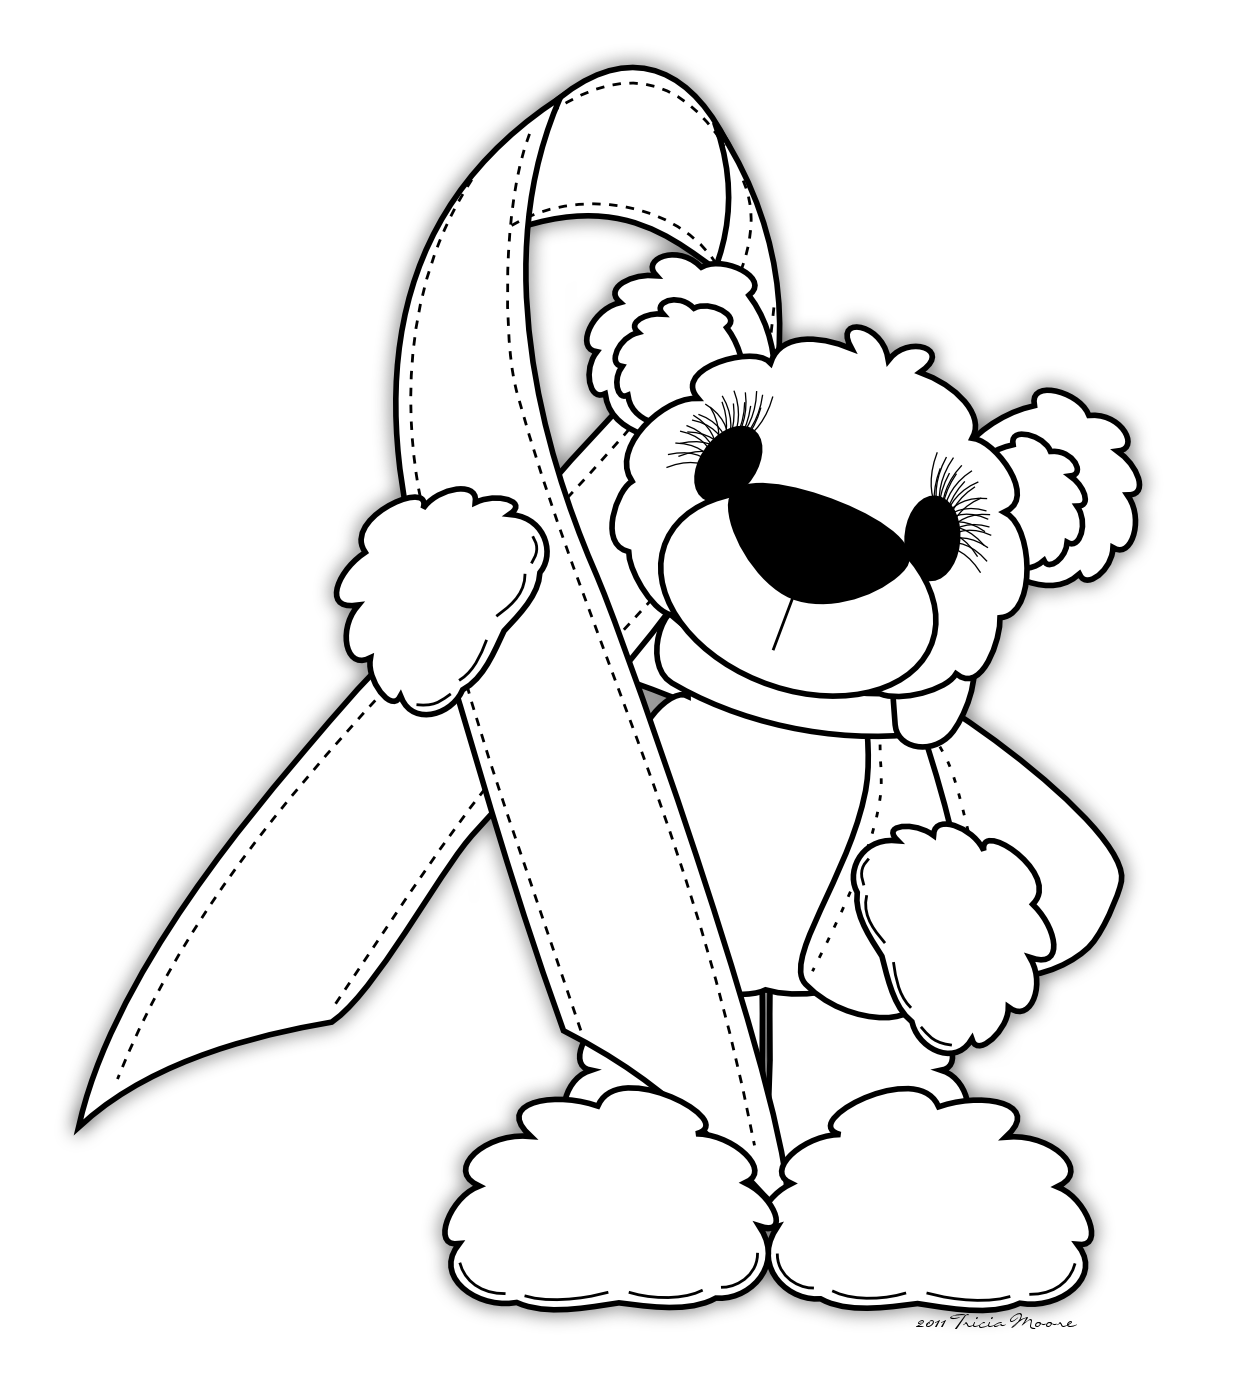 Pink ribbon coloring pages - Coloring Pages & Pictures - IMAGIXS